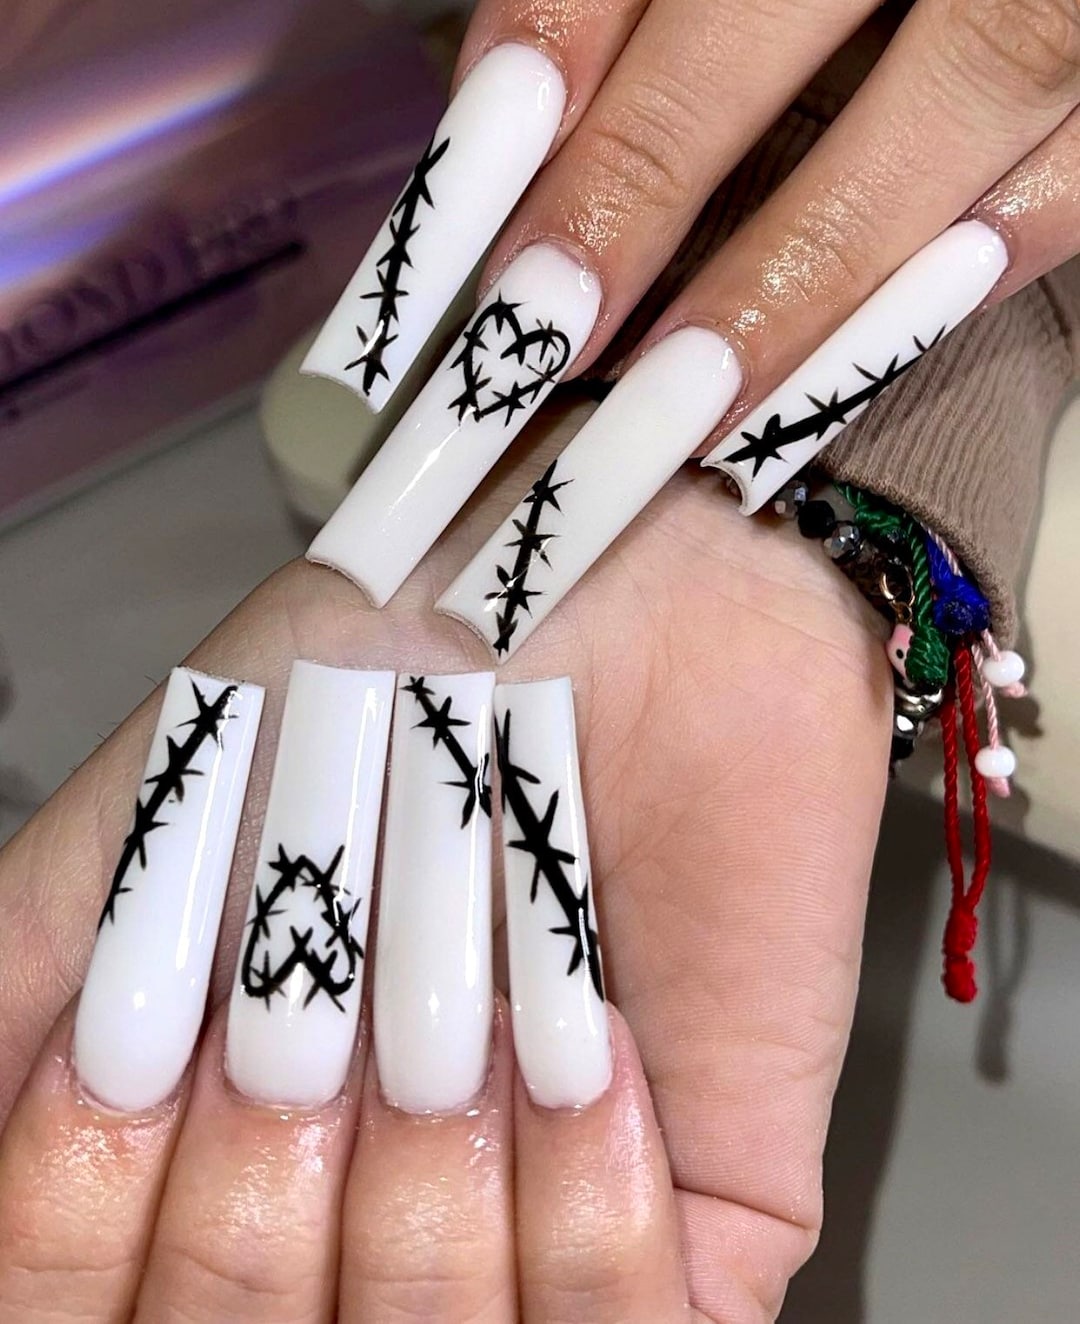 Karol G reveals her new edgy manicure